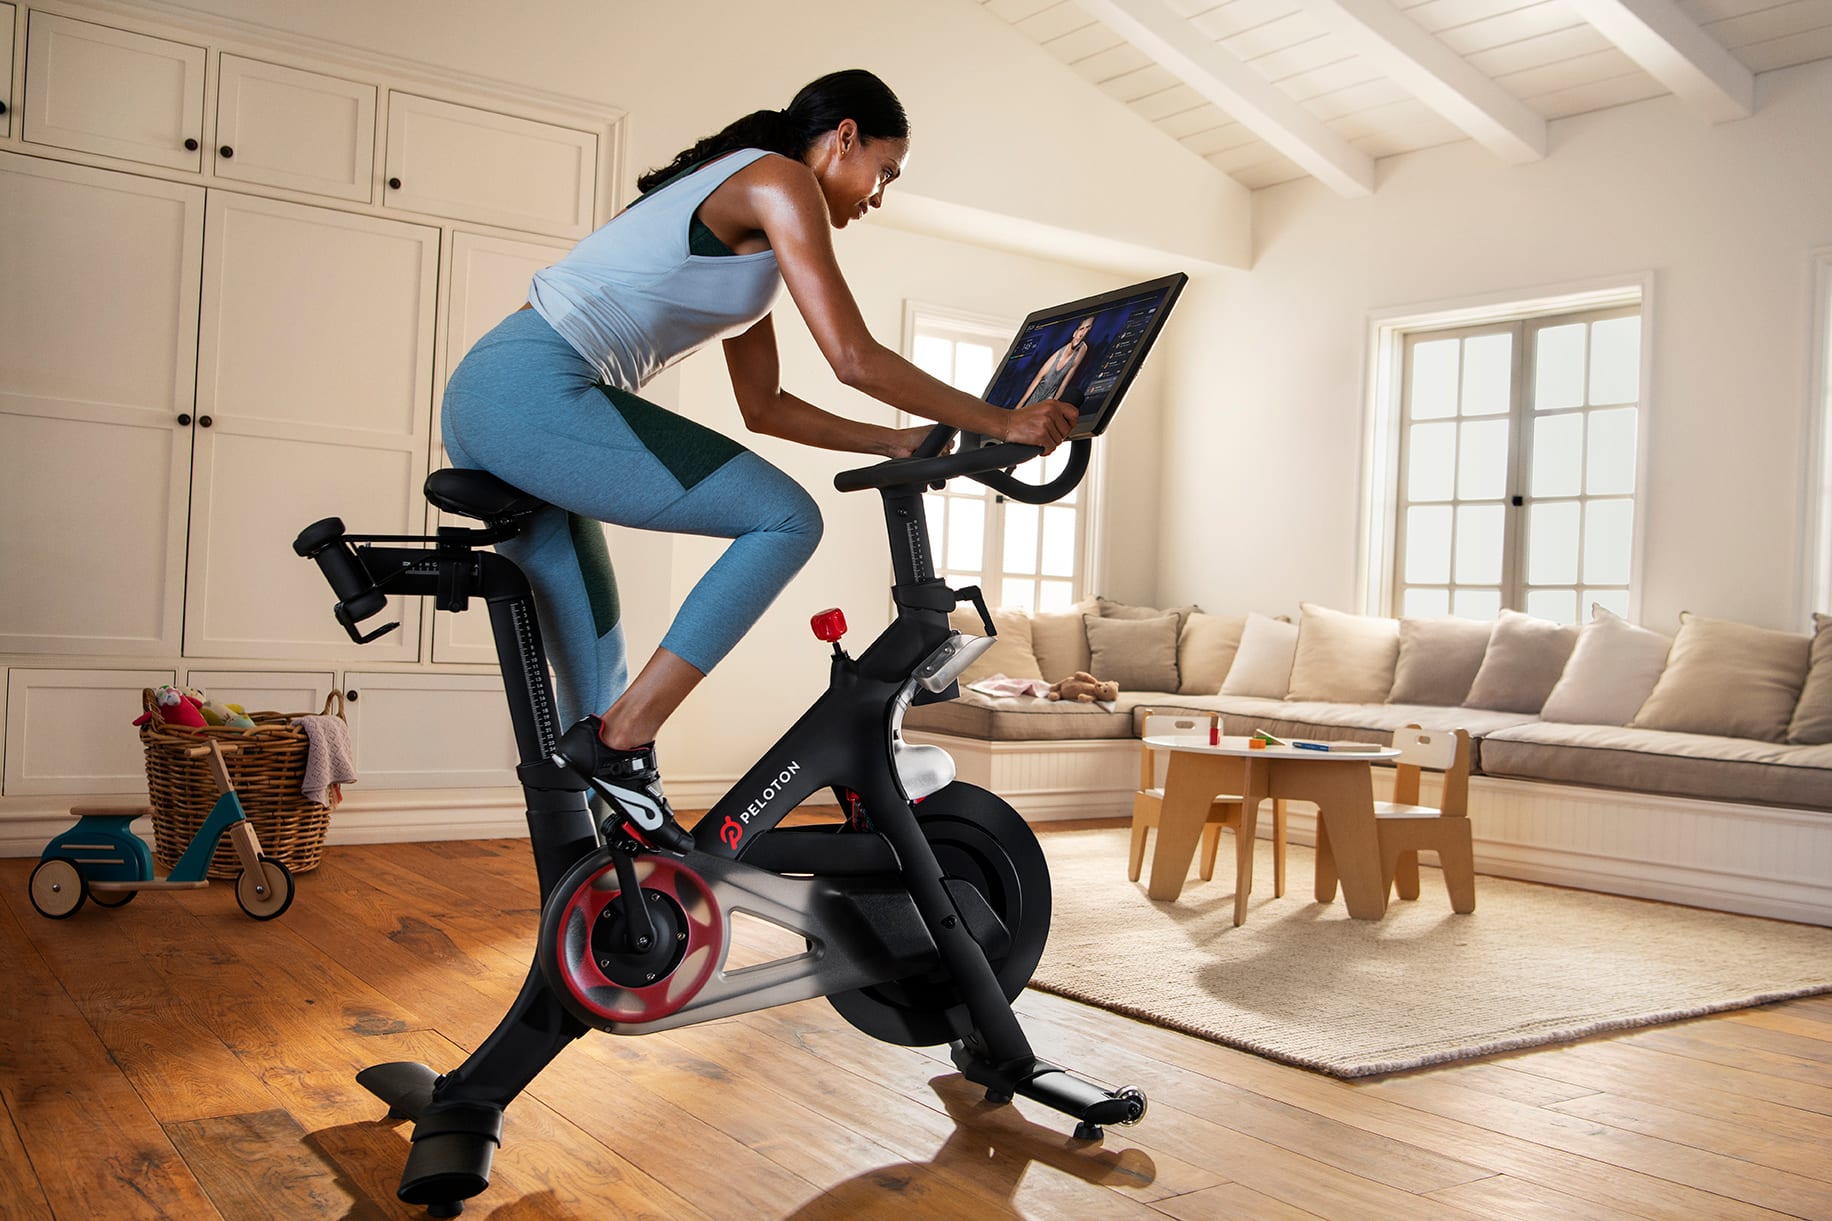 Peloton industrial highlights points with gifting big-ticket objects